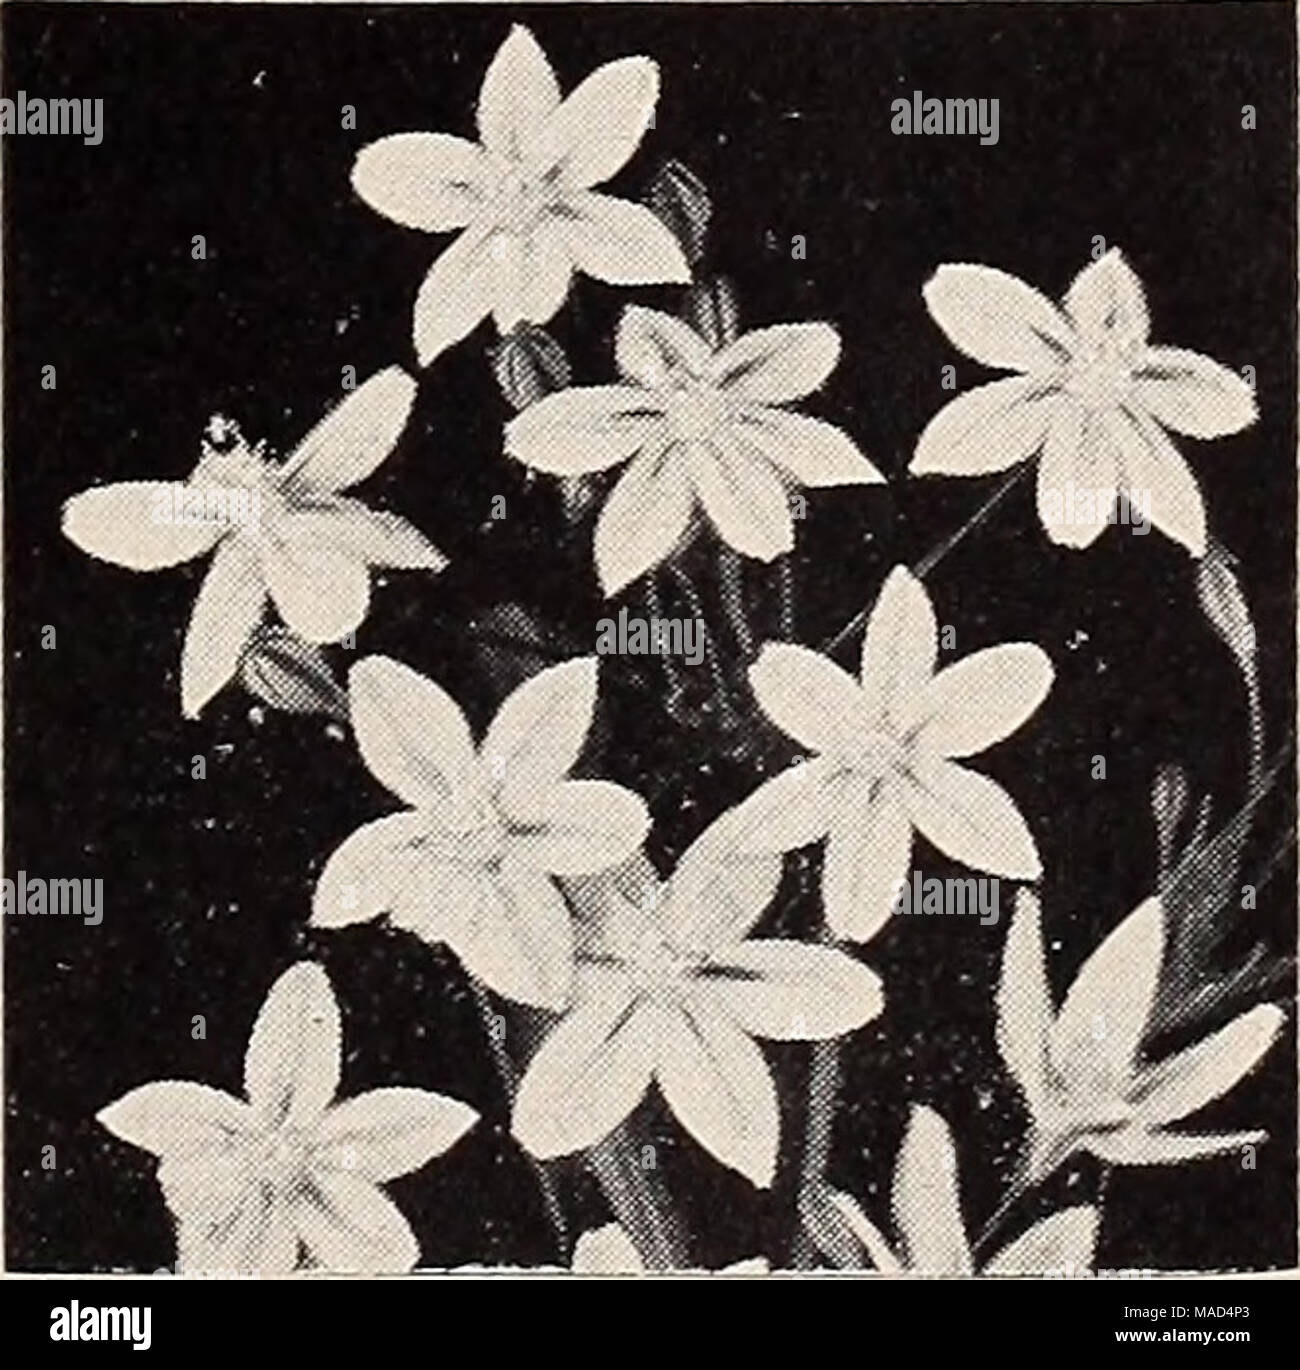 . Dreer's wholesale catalog for florists and market gardeners : autumn 1940 edition . Brodlaea—^A native of our Far West Brodiaea Mixed. These are lovely little bulbous plants native to our western states. They bloom during the spring and early summer, doing well in a sunny or semi- shaded position or in the gritty crevices of a deep rock garden pocket. They bear their showy blooms on stiff slender stems 8 to 15 inches long which makes them valuable for cutting. Some varieties in this mixture have lovely star-shaped blooms whereas others produce long trumpets with the petal tipa flaring at the Stock Photo